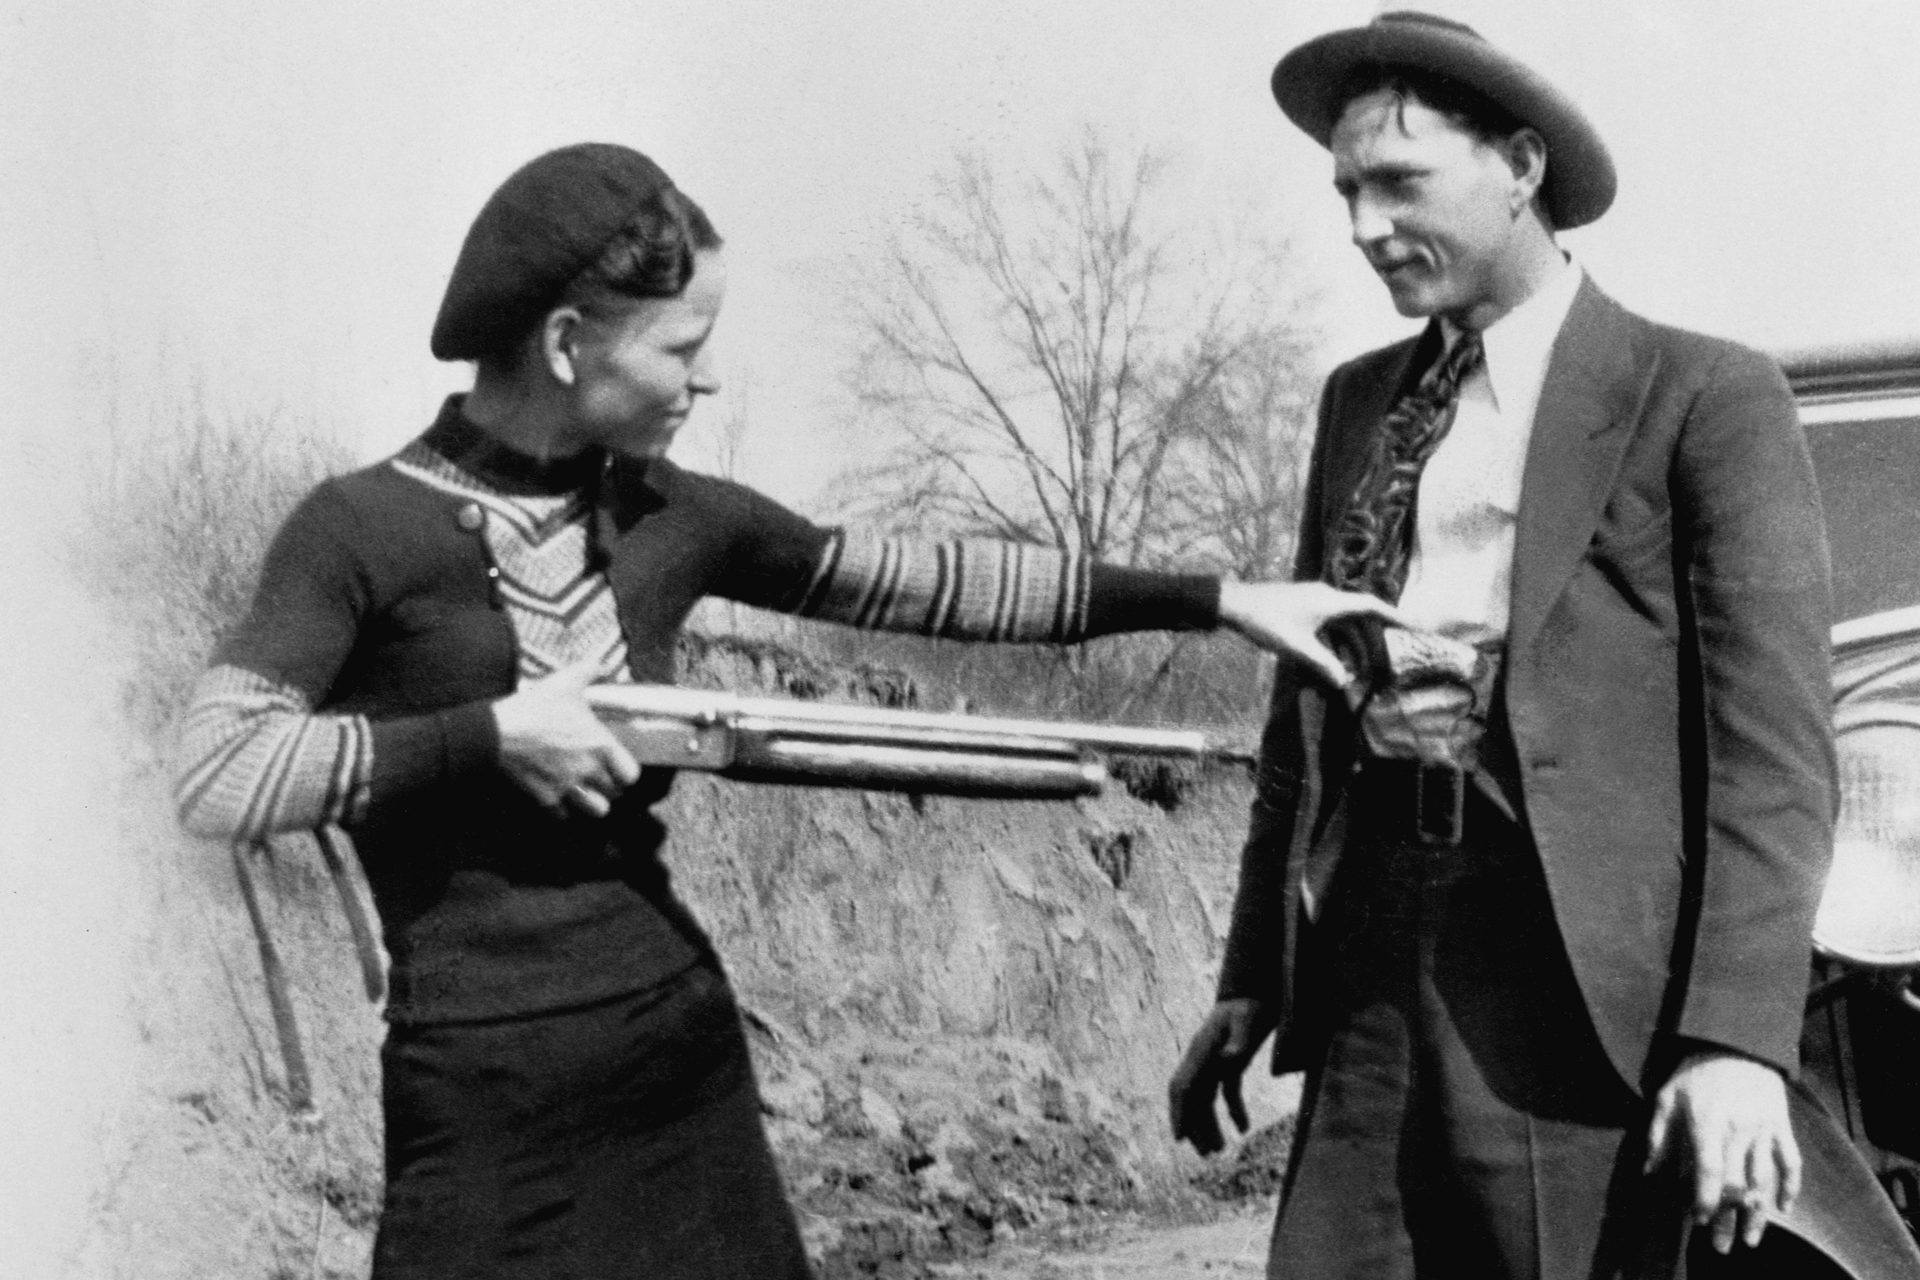 90 years after Bonnie and Clyde: the best films inspired by the duo